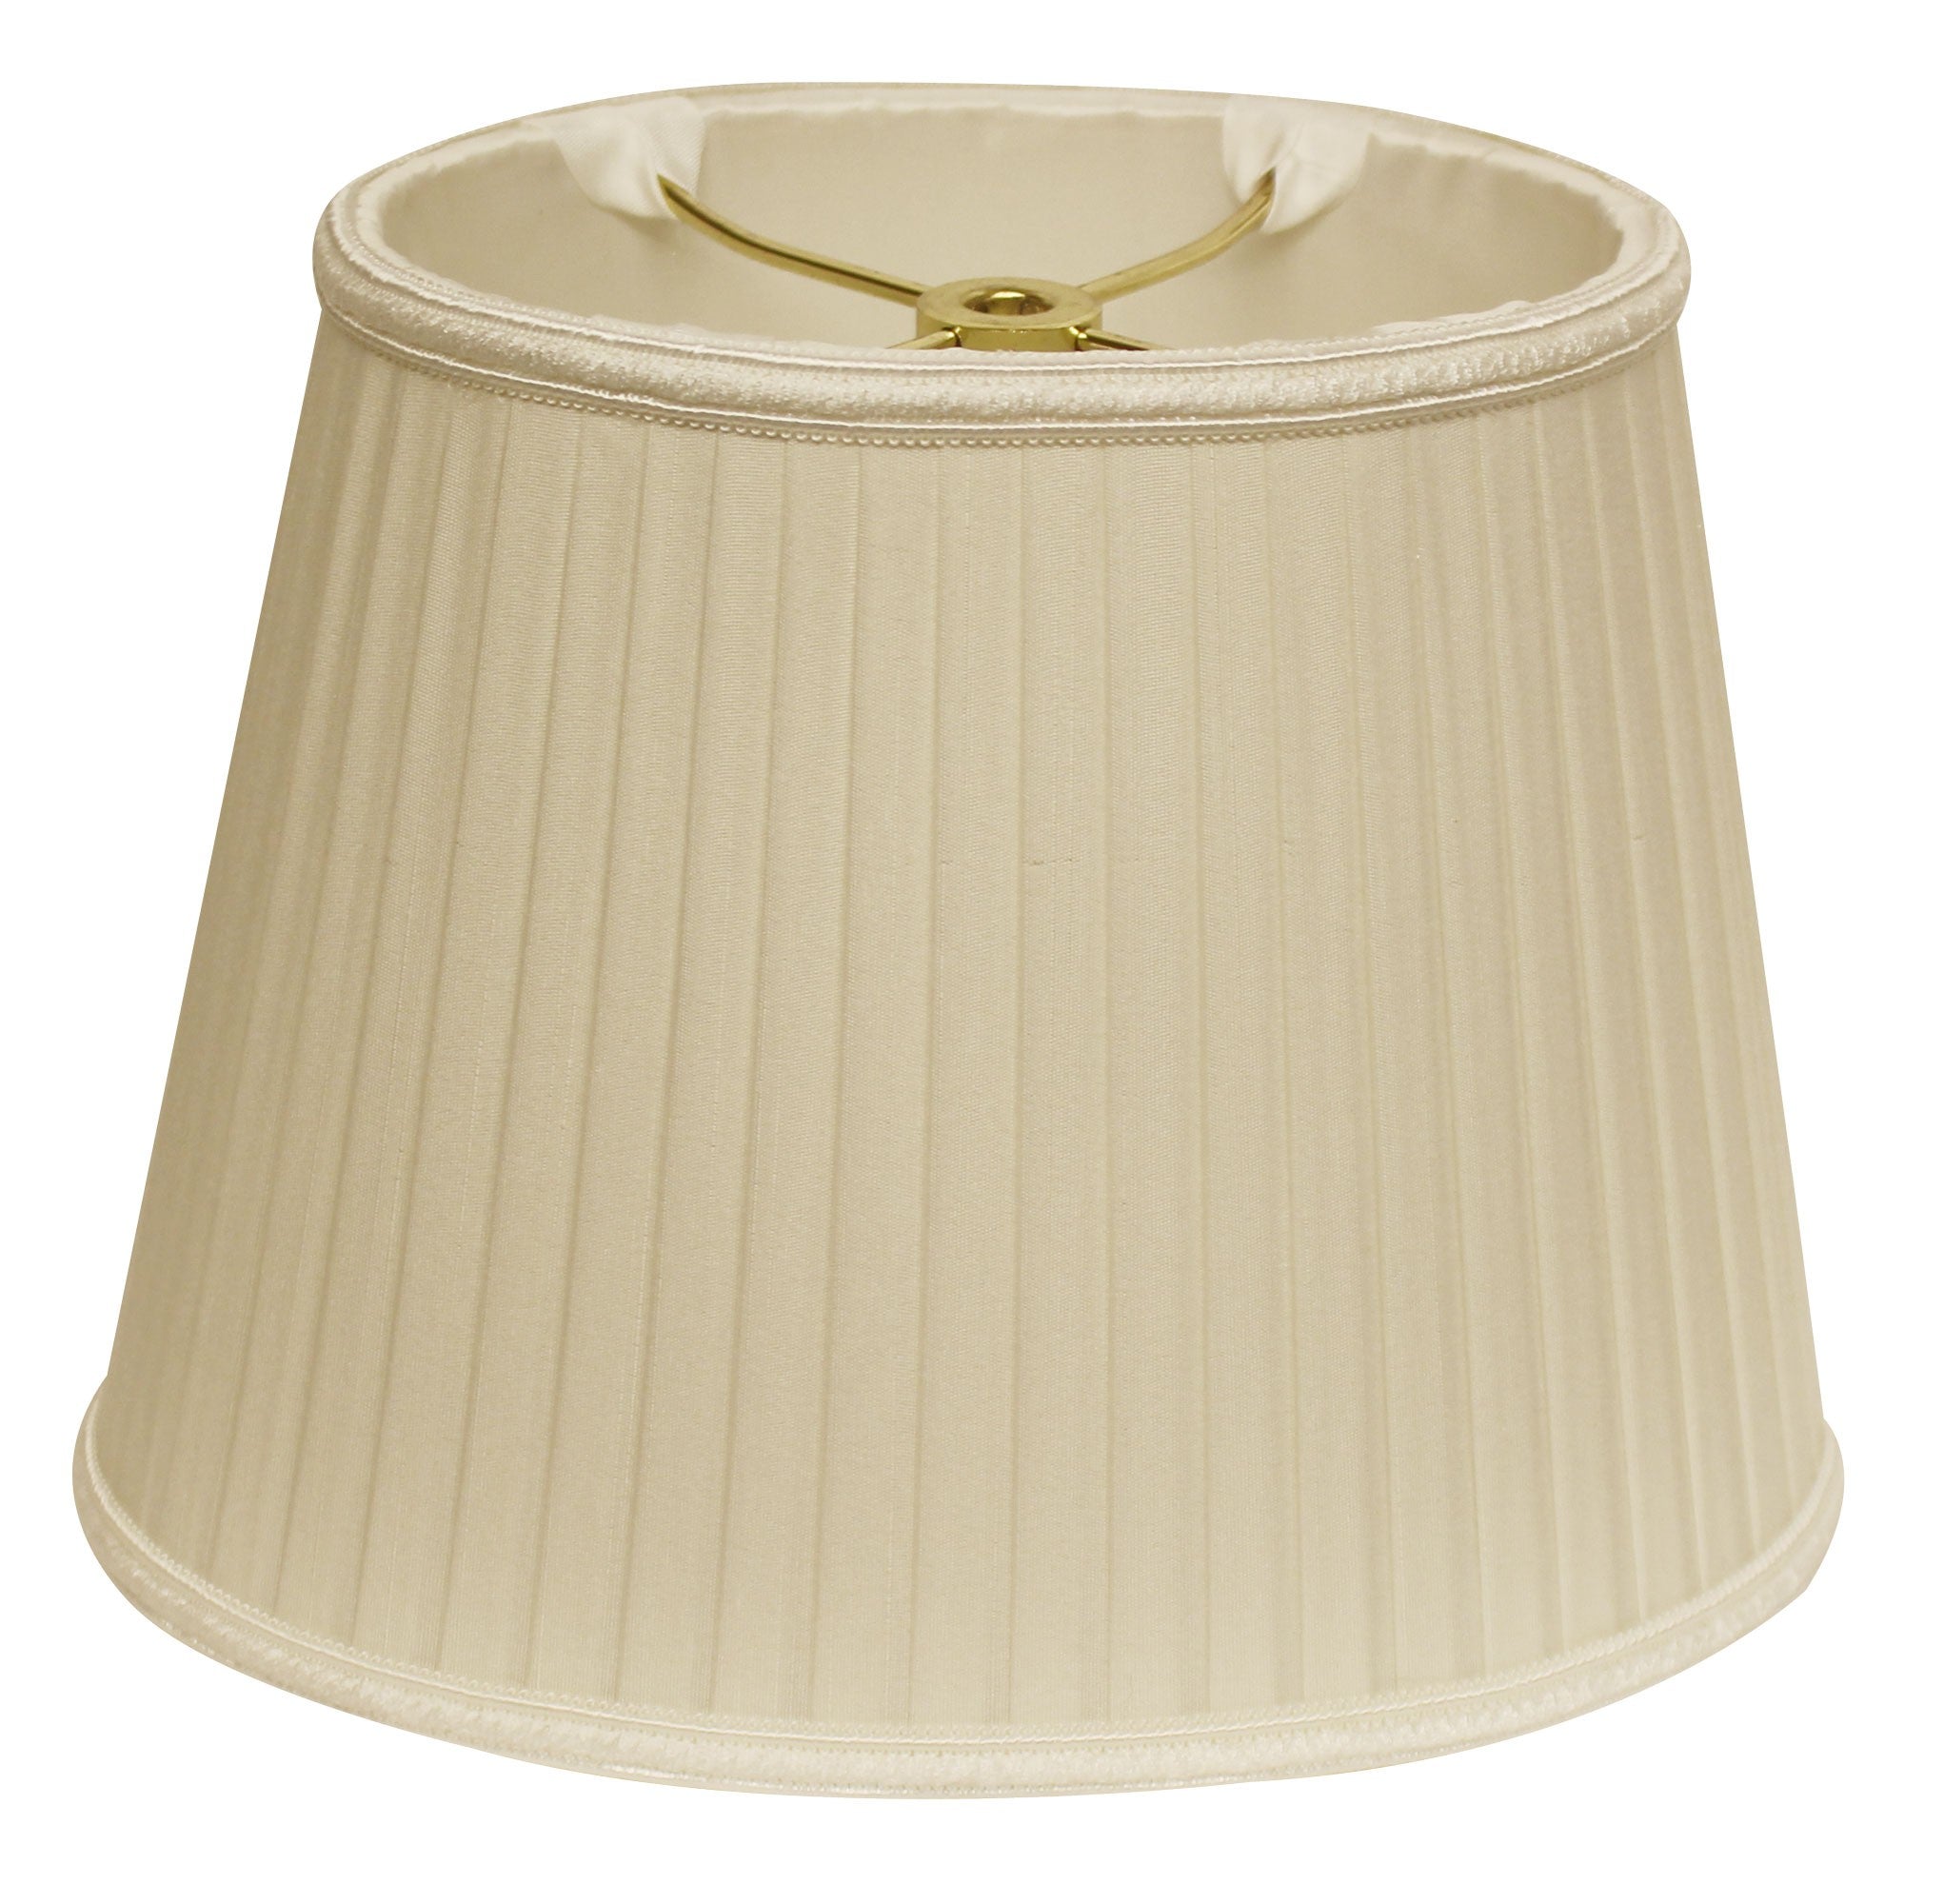 12" Ivory Oval Side Pleat Paperback Shantung Lampshade